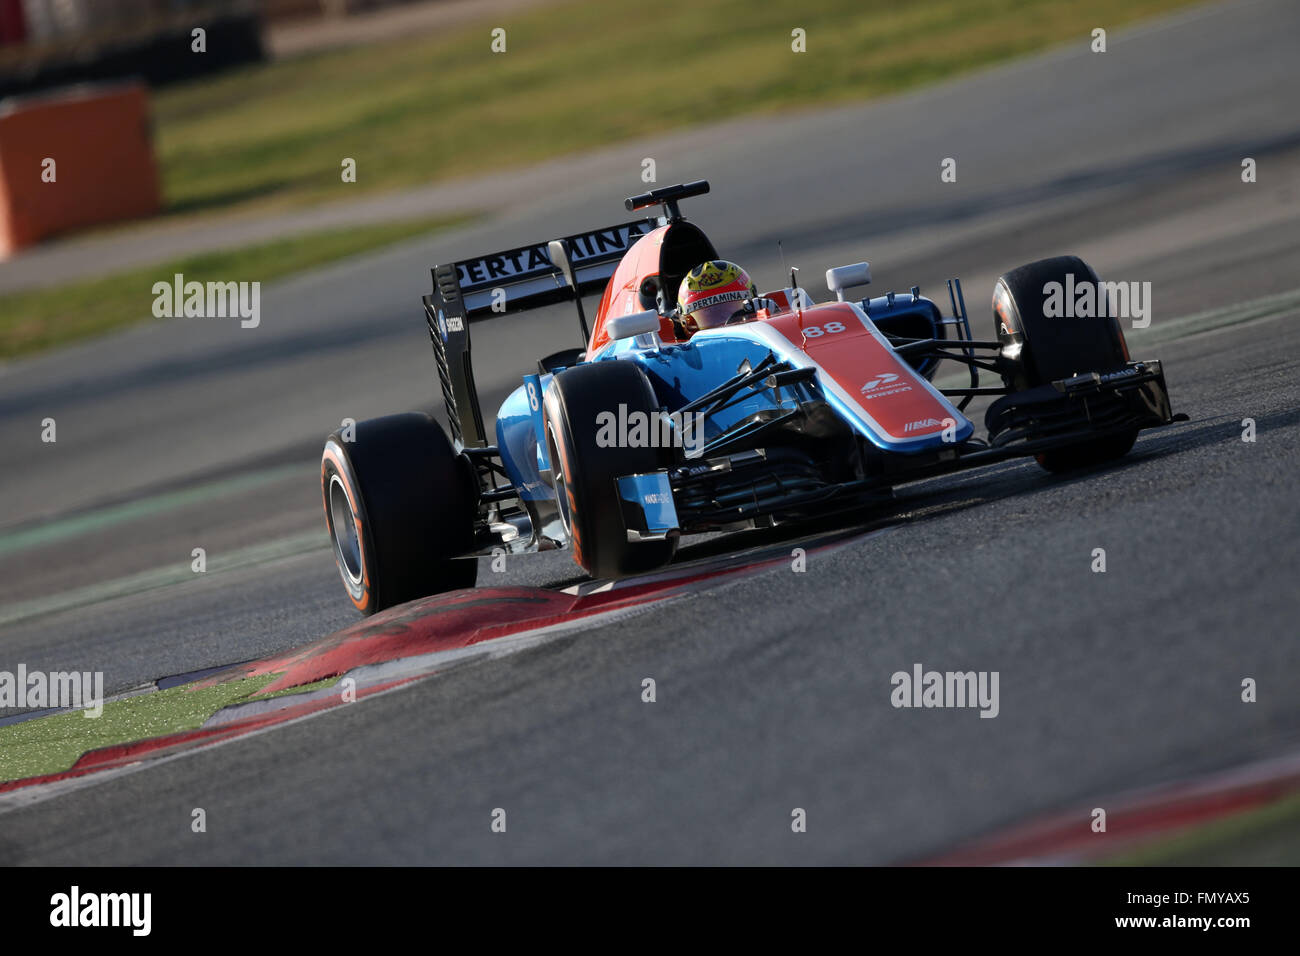 Indonesian Formula One driver Rio Haryanto of Manor Racing steers his car during the training session for the upcoming Formula One season at the Circuit de Barcelona - Catalunya in Barcelona, Spain, 24 February 2016. Photo: Jens Buettner/dpa Stock Photo